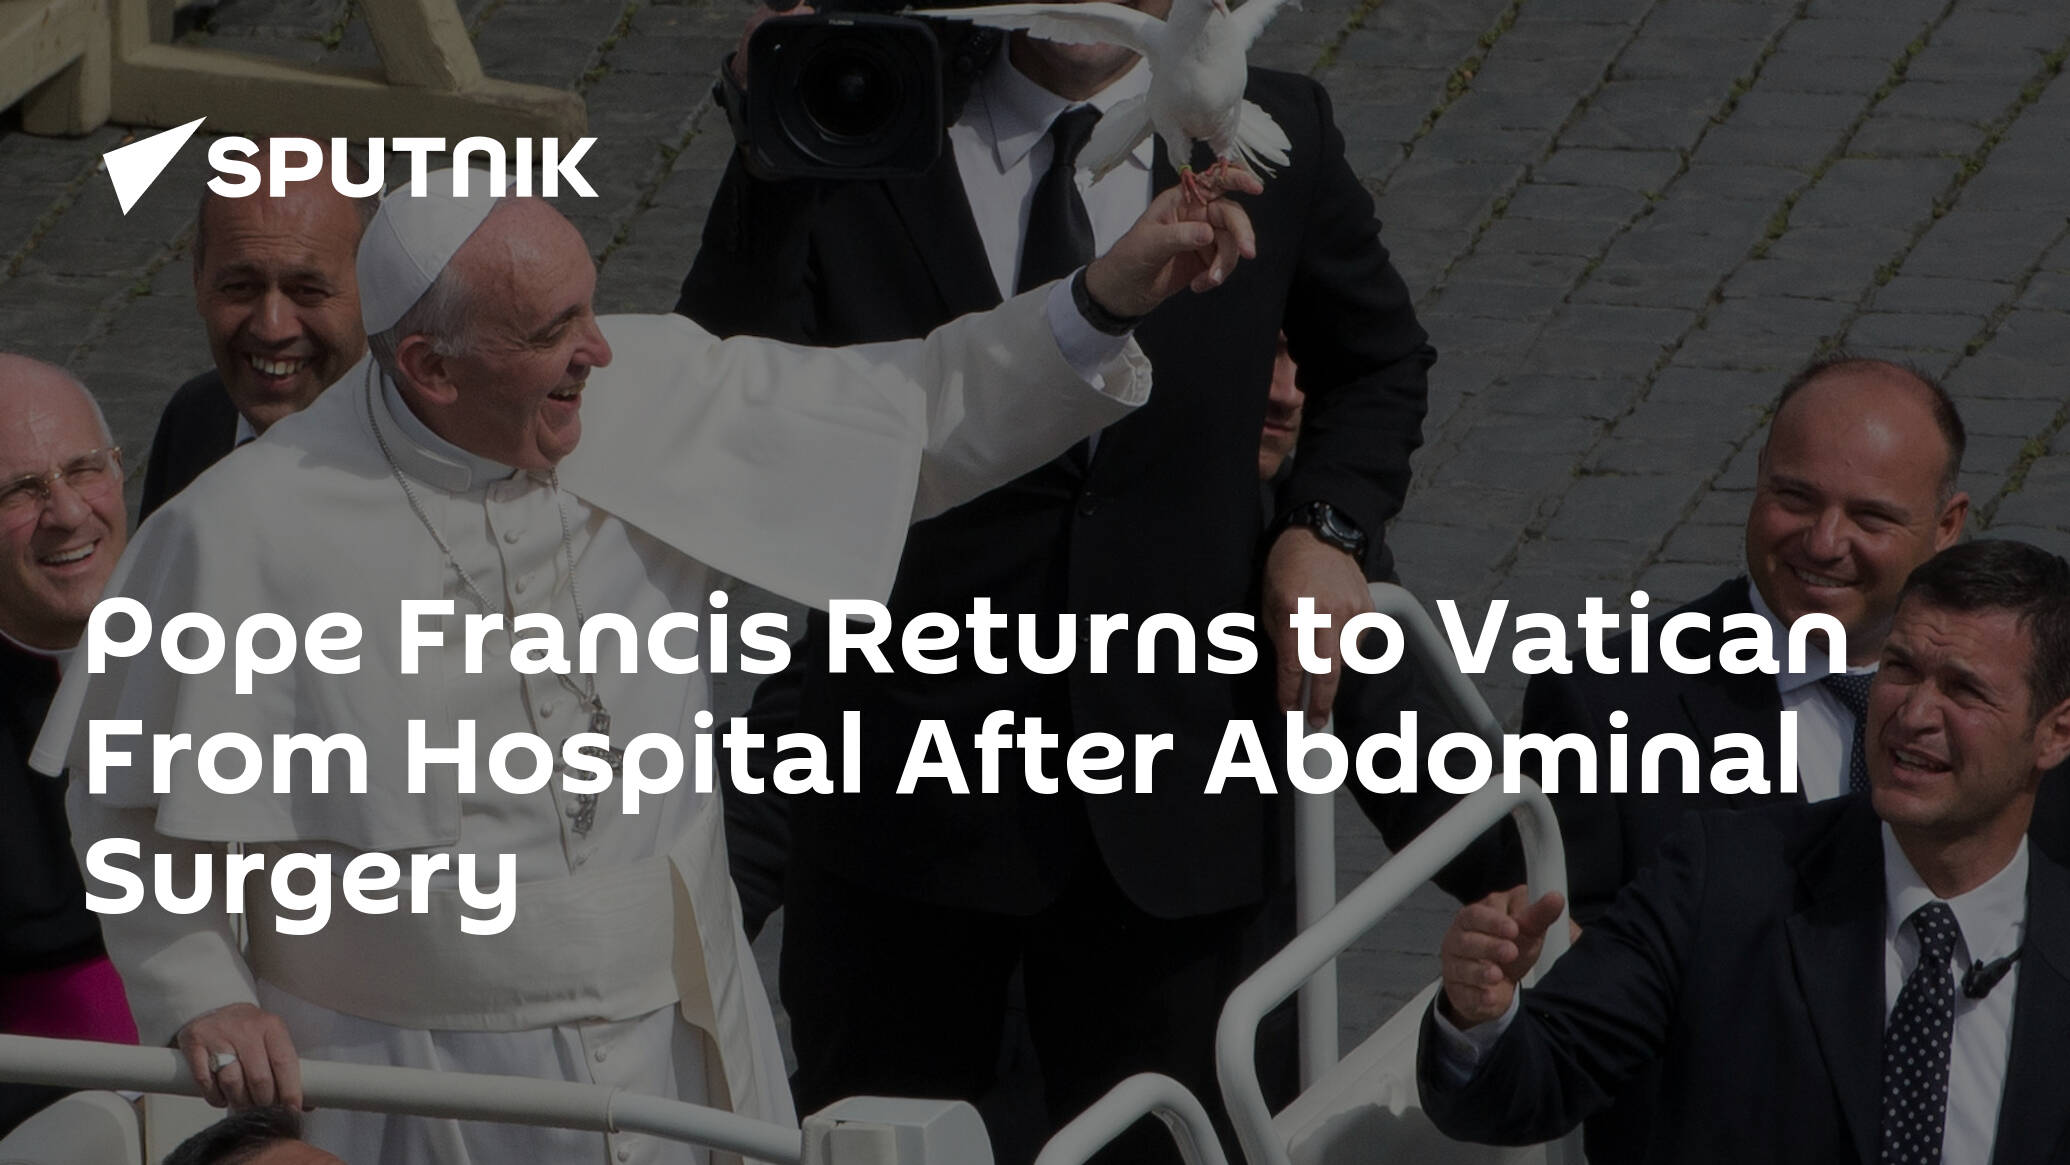 Pope Francis Returns to Vatican From Hospital After Abdominal Surgery